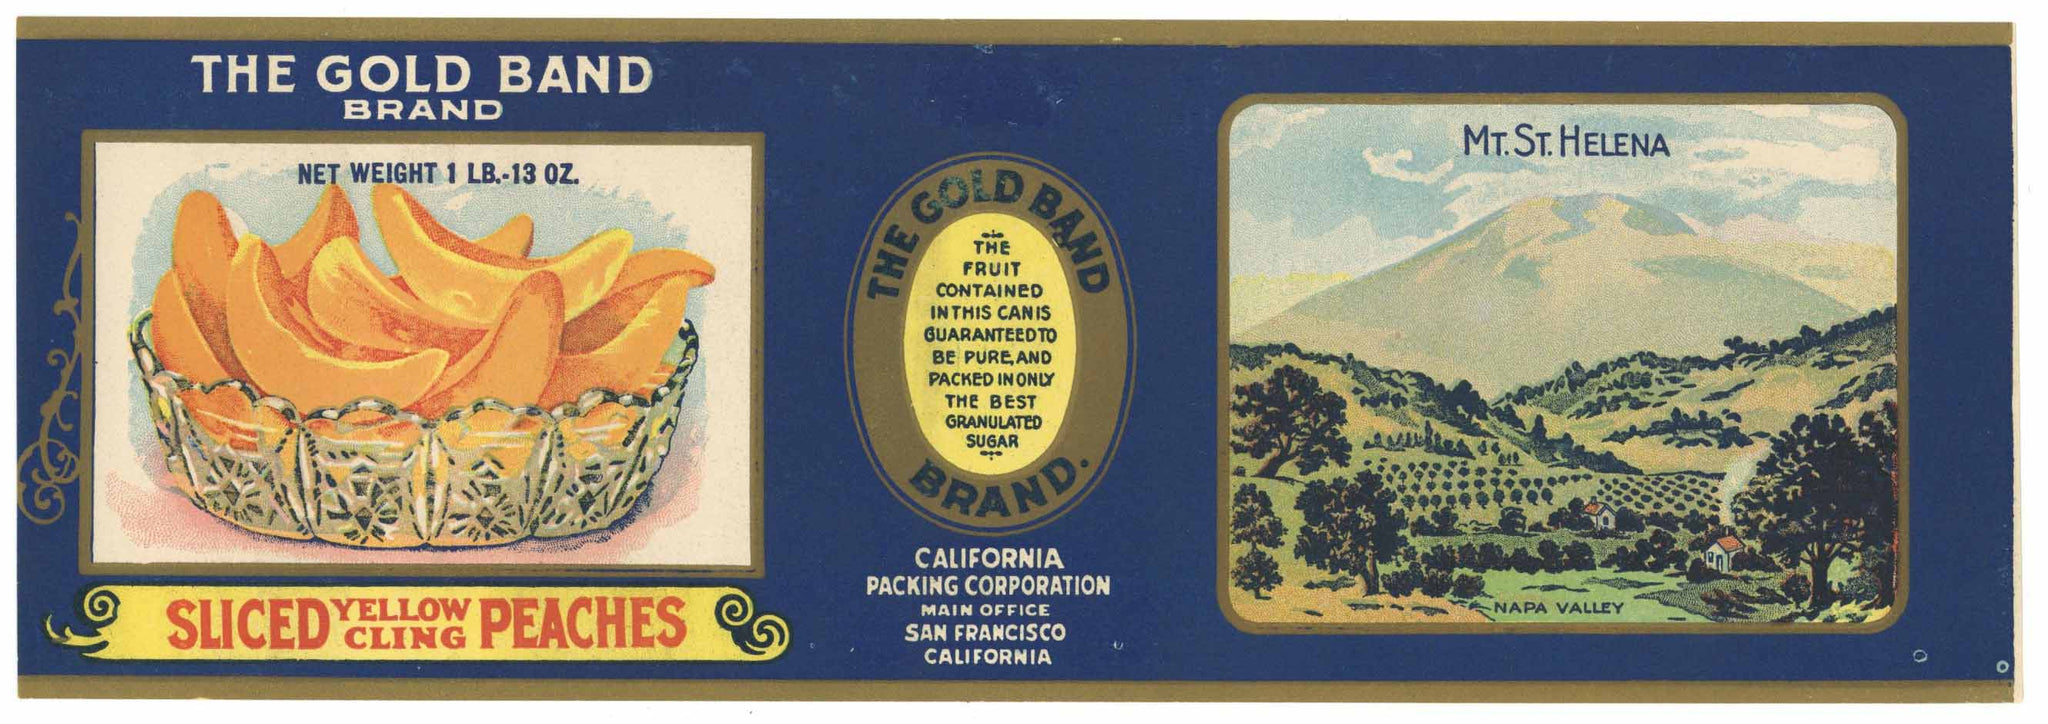 The Gold Band Brand Vintage Napa Valley Peach Can Label